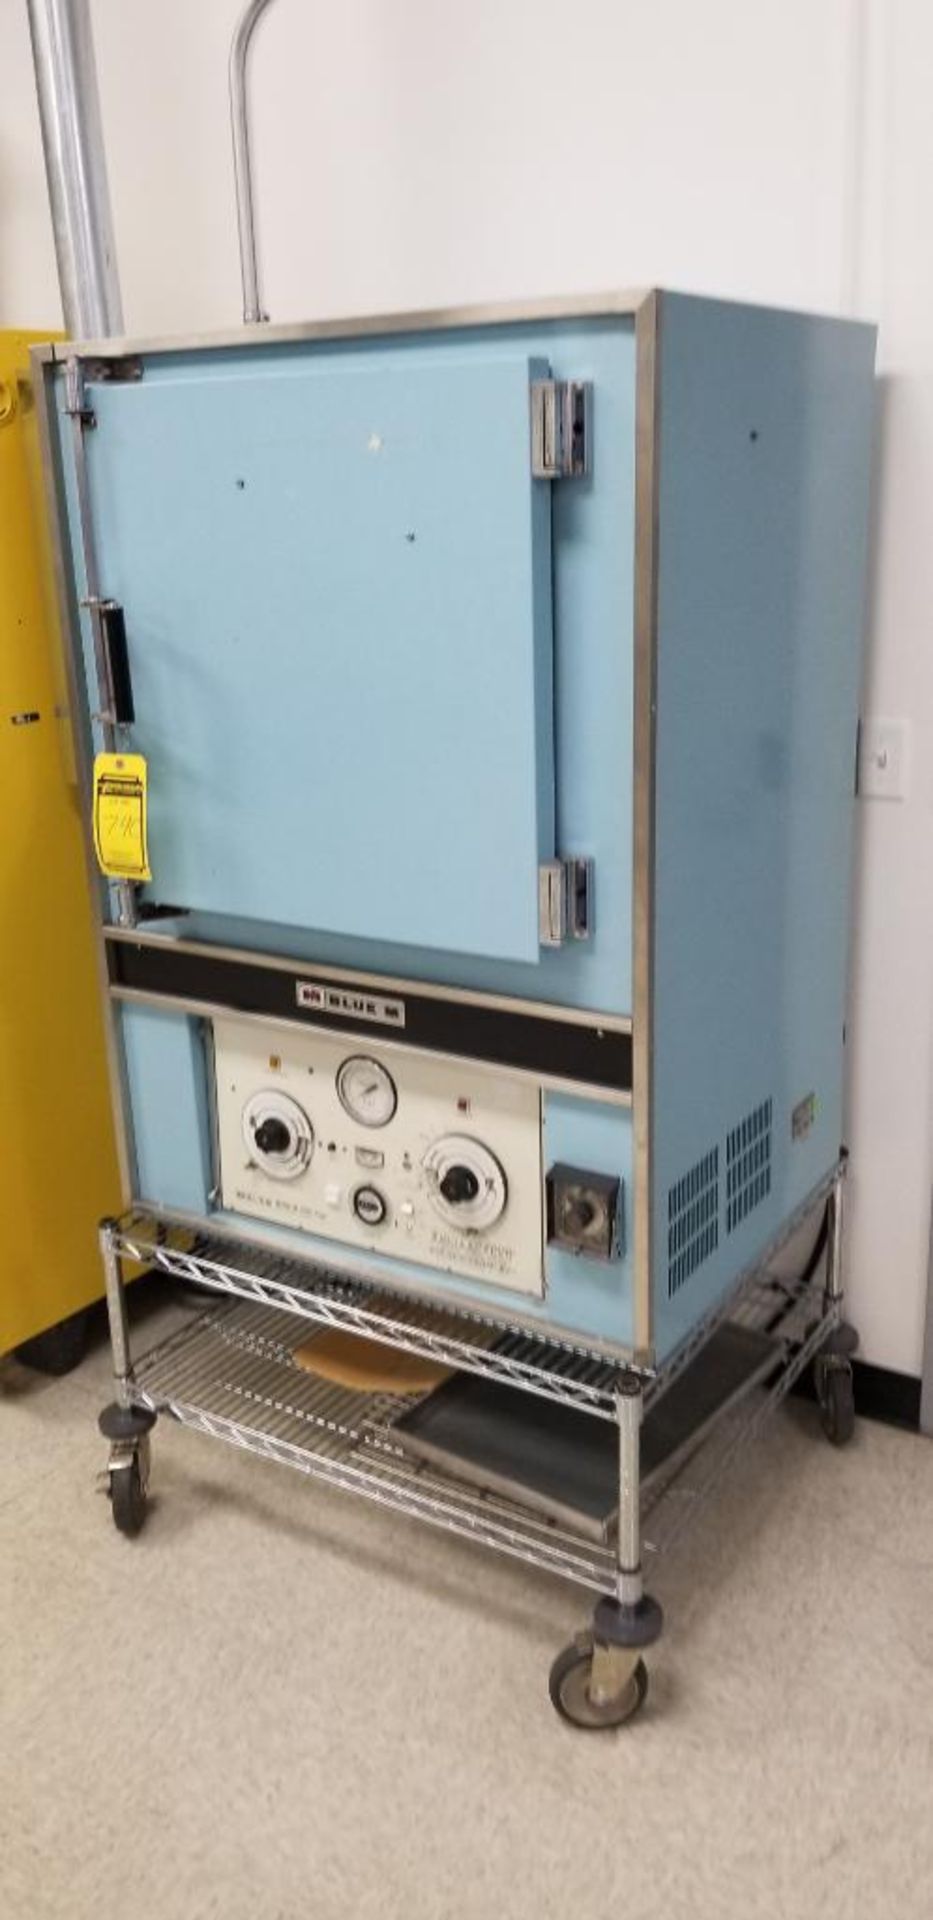 Blue M Electric Co. Master Heat Mechanical Convection Oven, Model P0M7-2060, 240V, Single Phase - Image 2 of 5